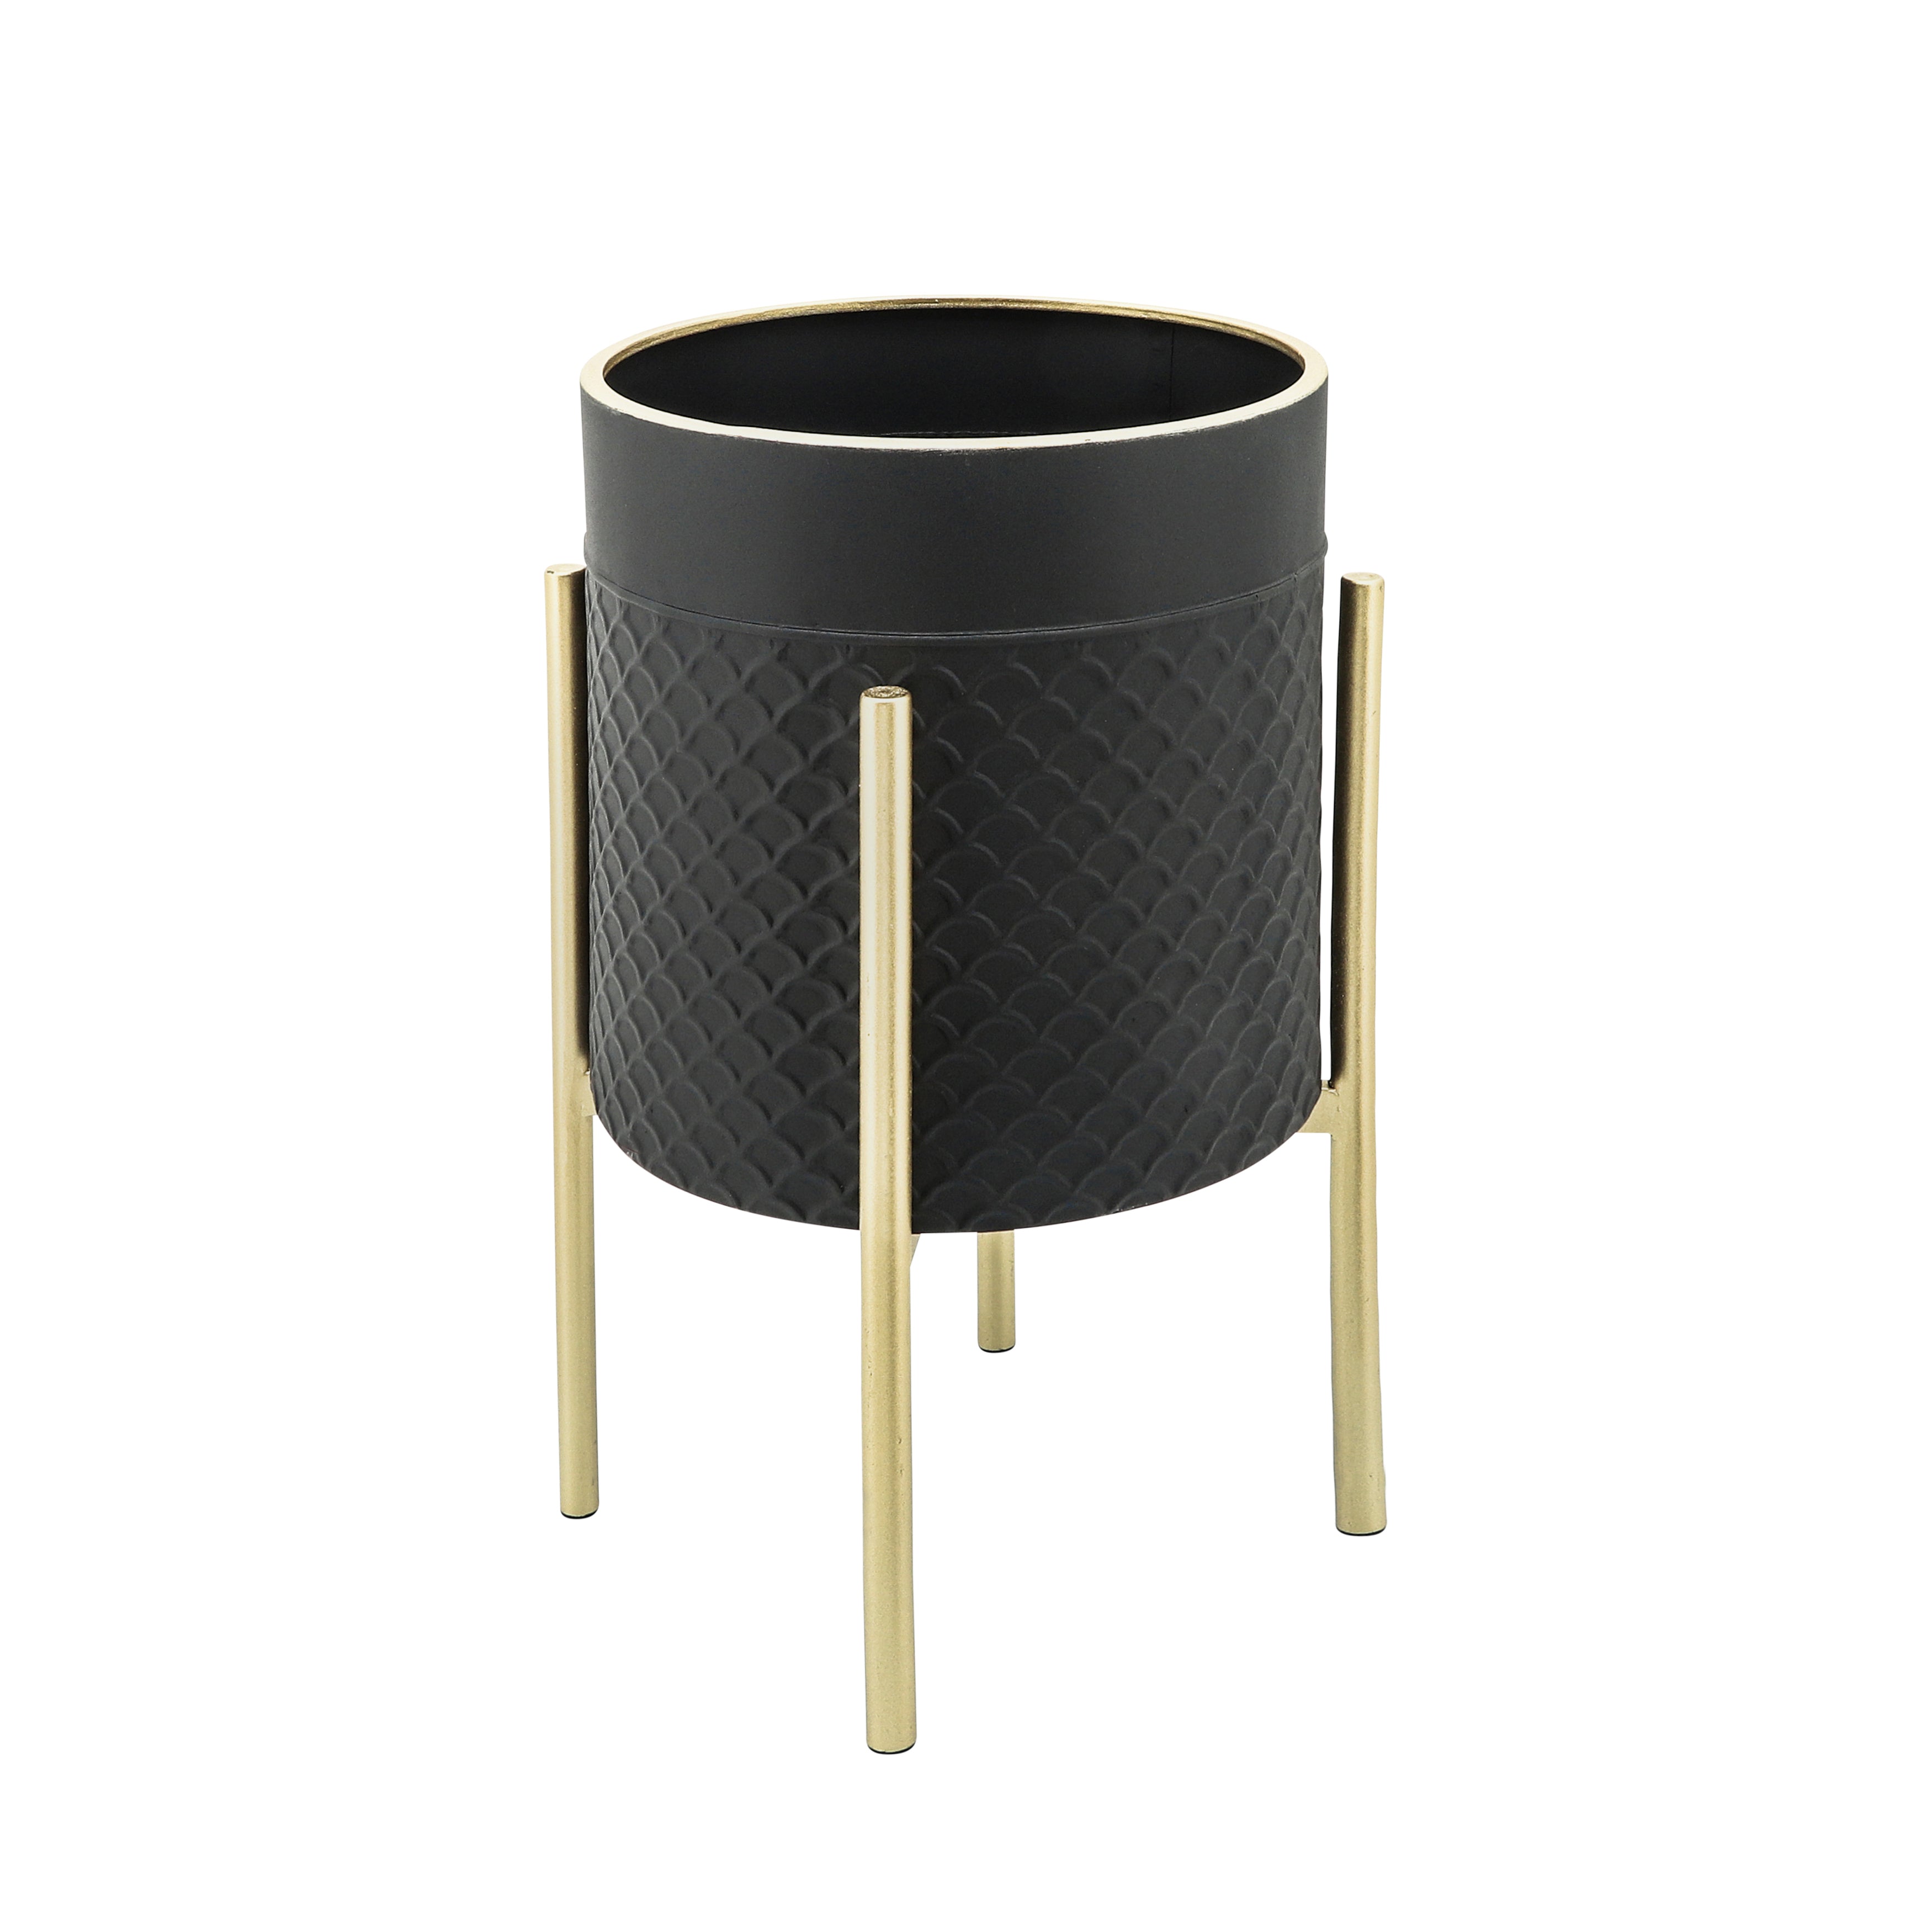 Set of 2 Scales Planter On Metal Stand, Blk/Gold, Planters